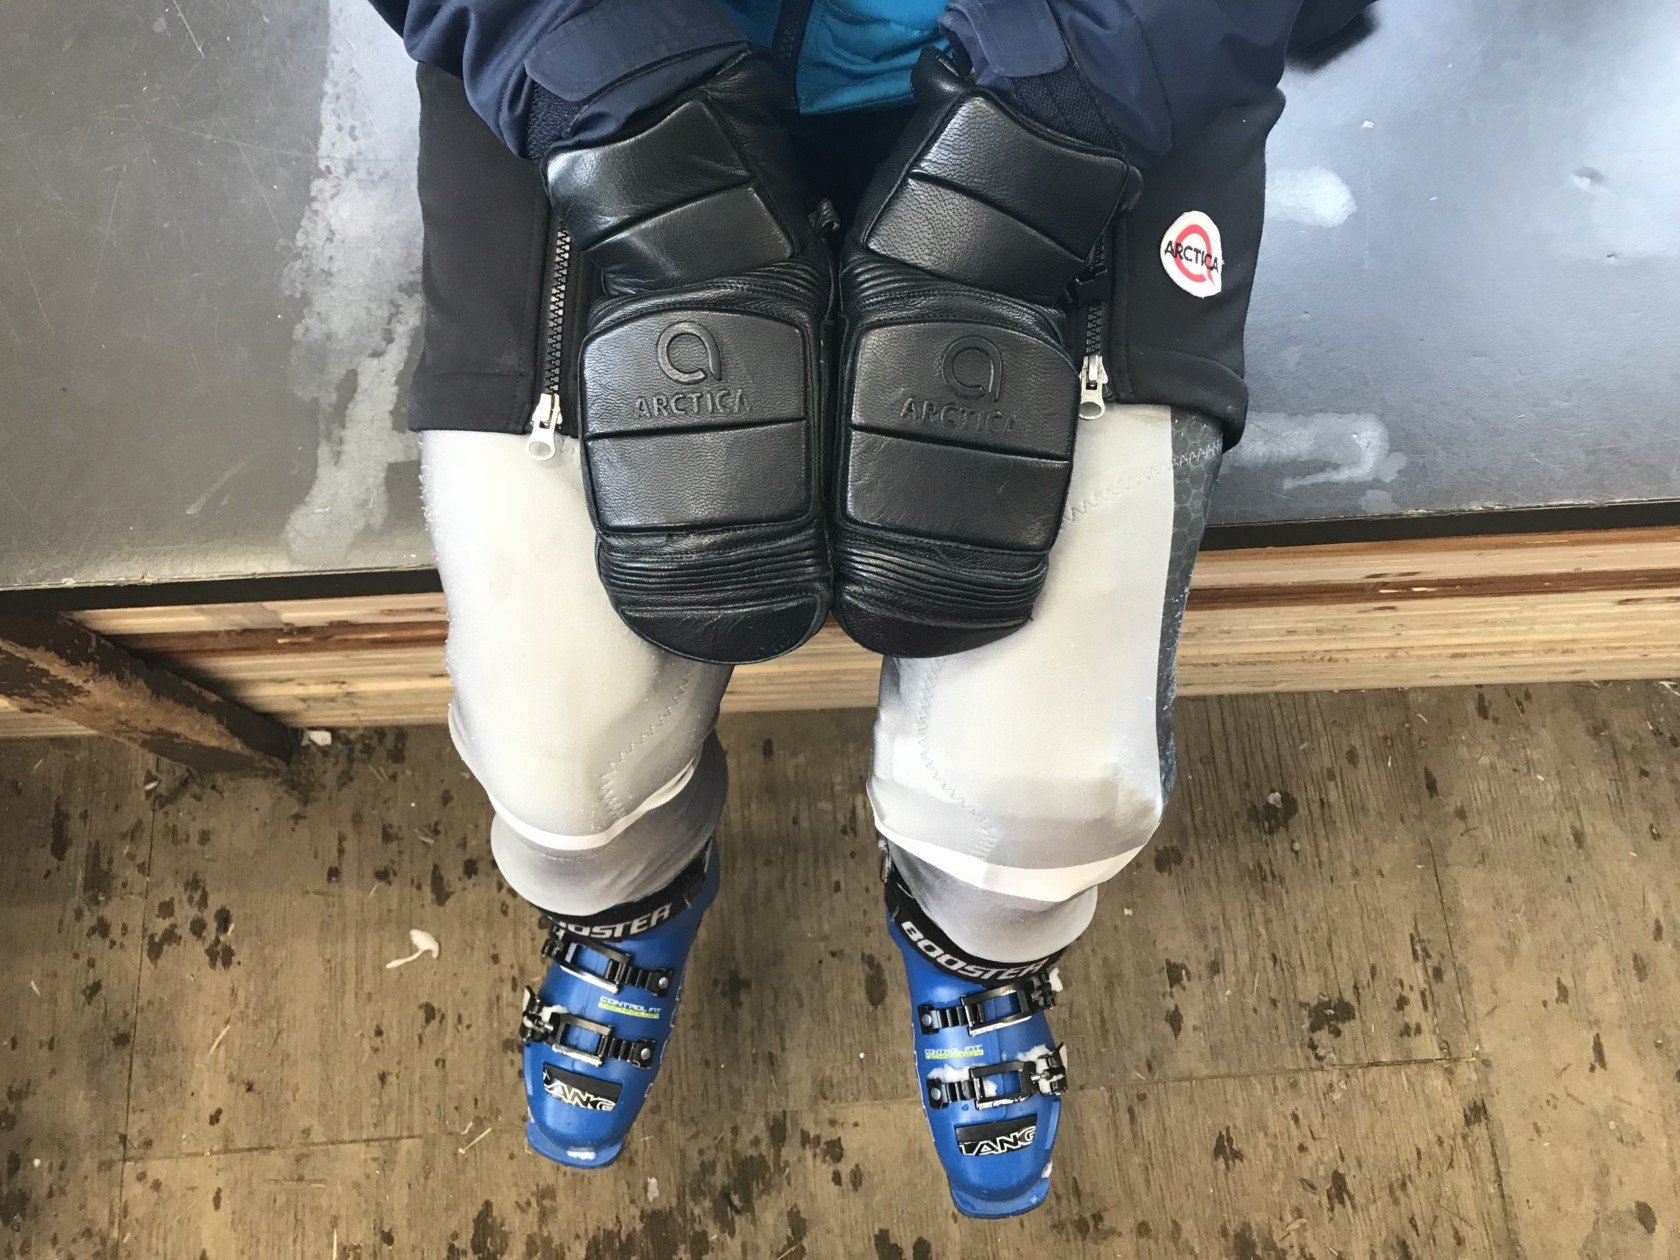 Ski racer in their Arctica race suit, shorts and mittens.